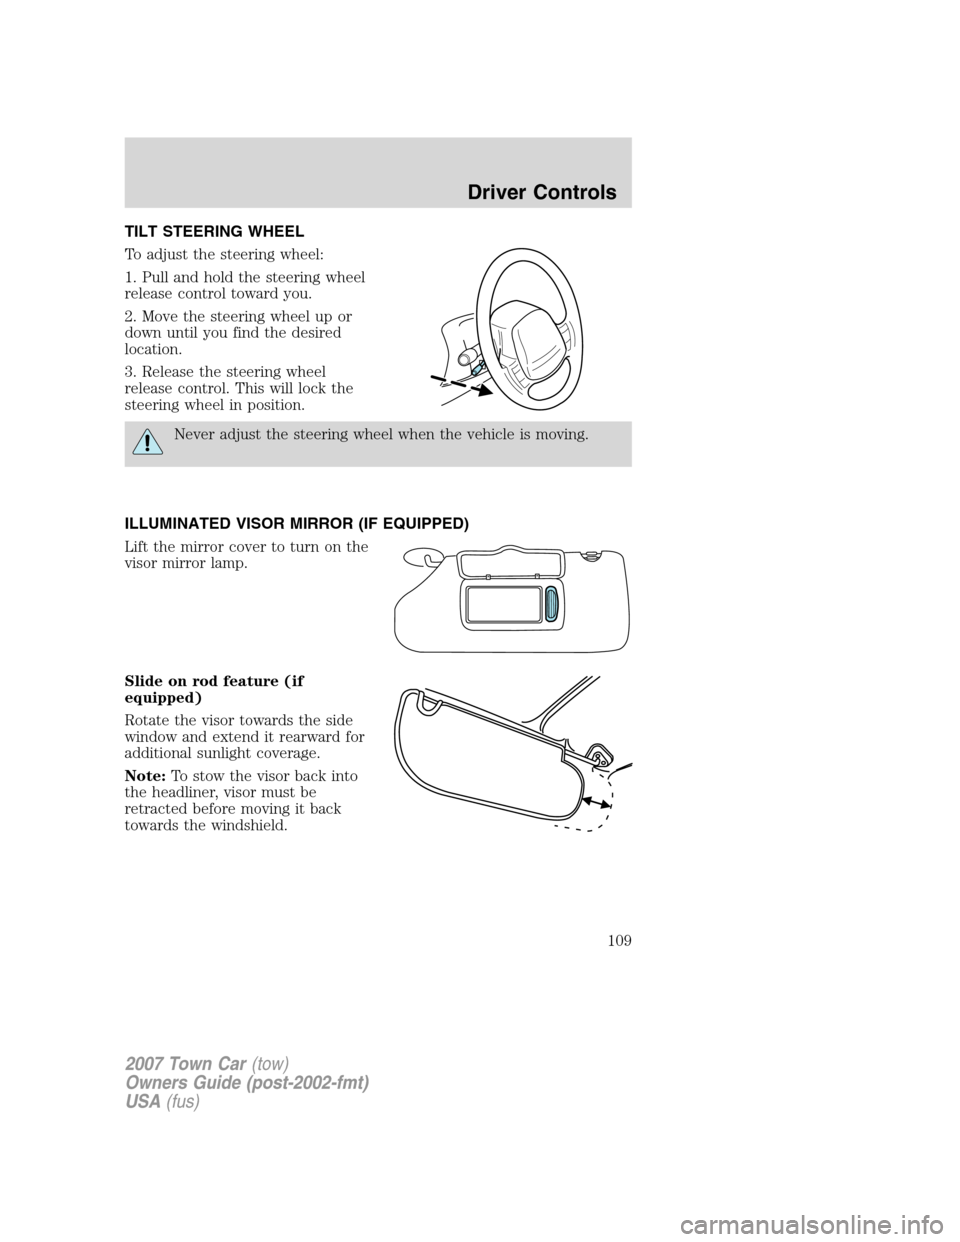 LINCOLN TOWN CAR 2007  Owners Manual TILT STEERING WHEEL
To adjust the steering wheel:
1. Pull and hold the steering wheel
release control toward you.
2. Move the steering wheel up or
down until you find the desired
location.
3. Release 